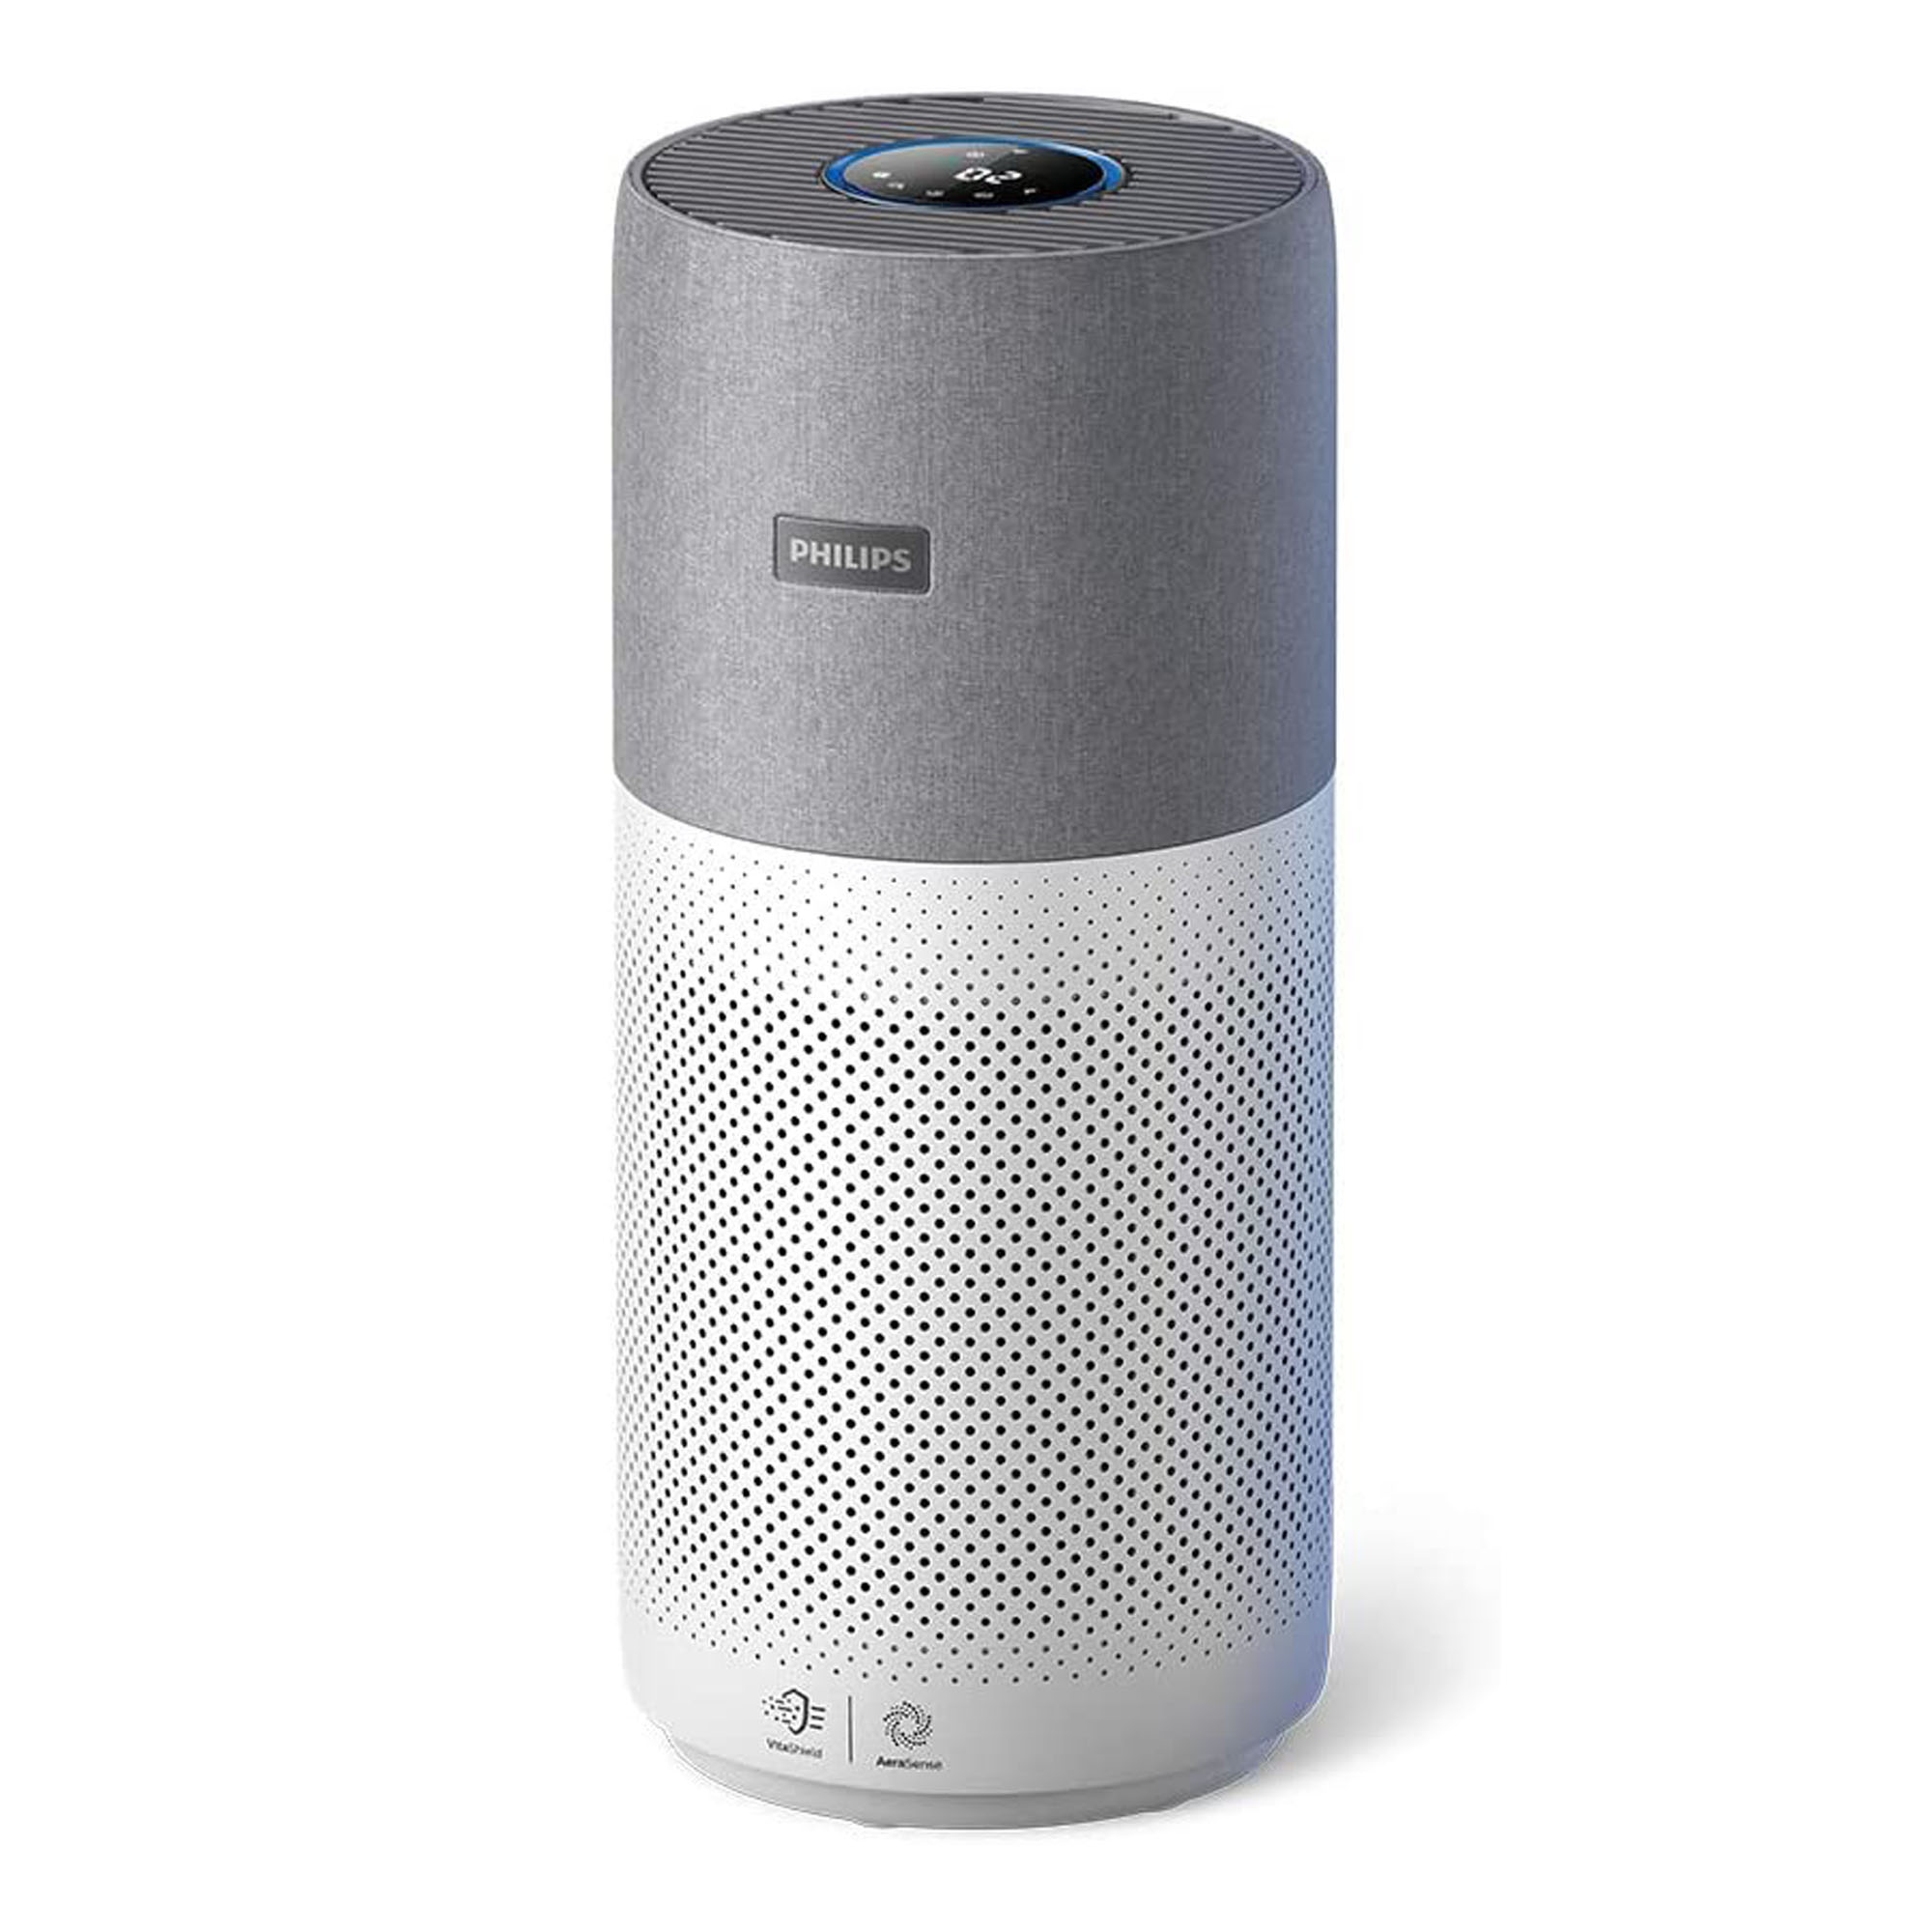 The Philips AC3033/30 Expert Series 3000i Connected Air Purifier a grey cylinder design